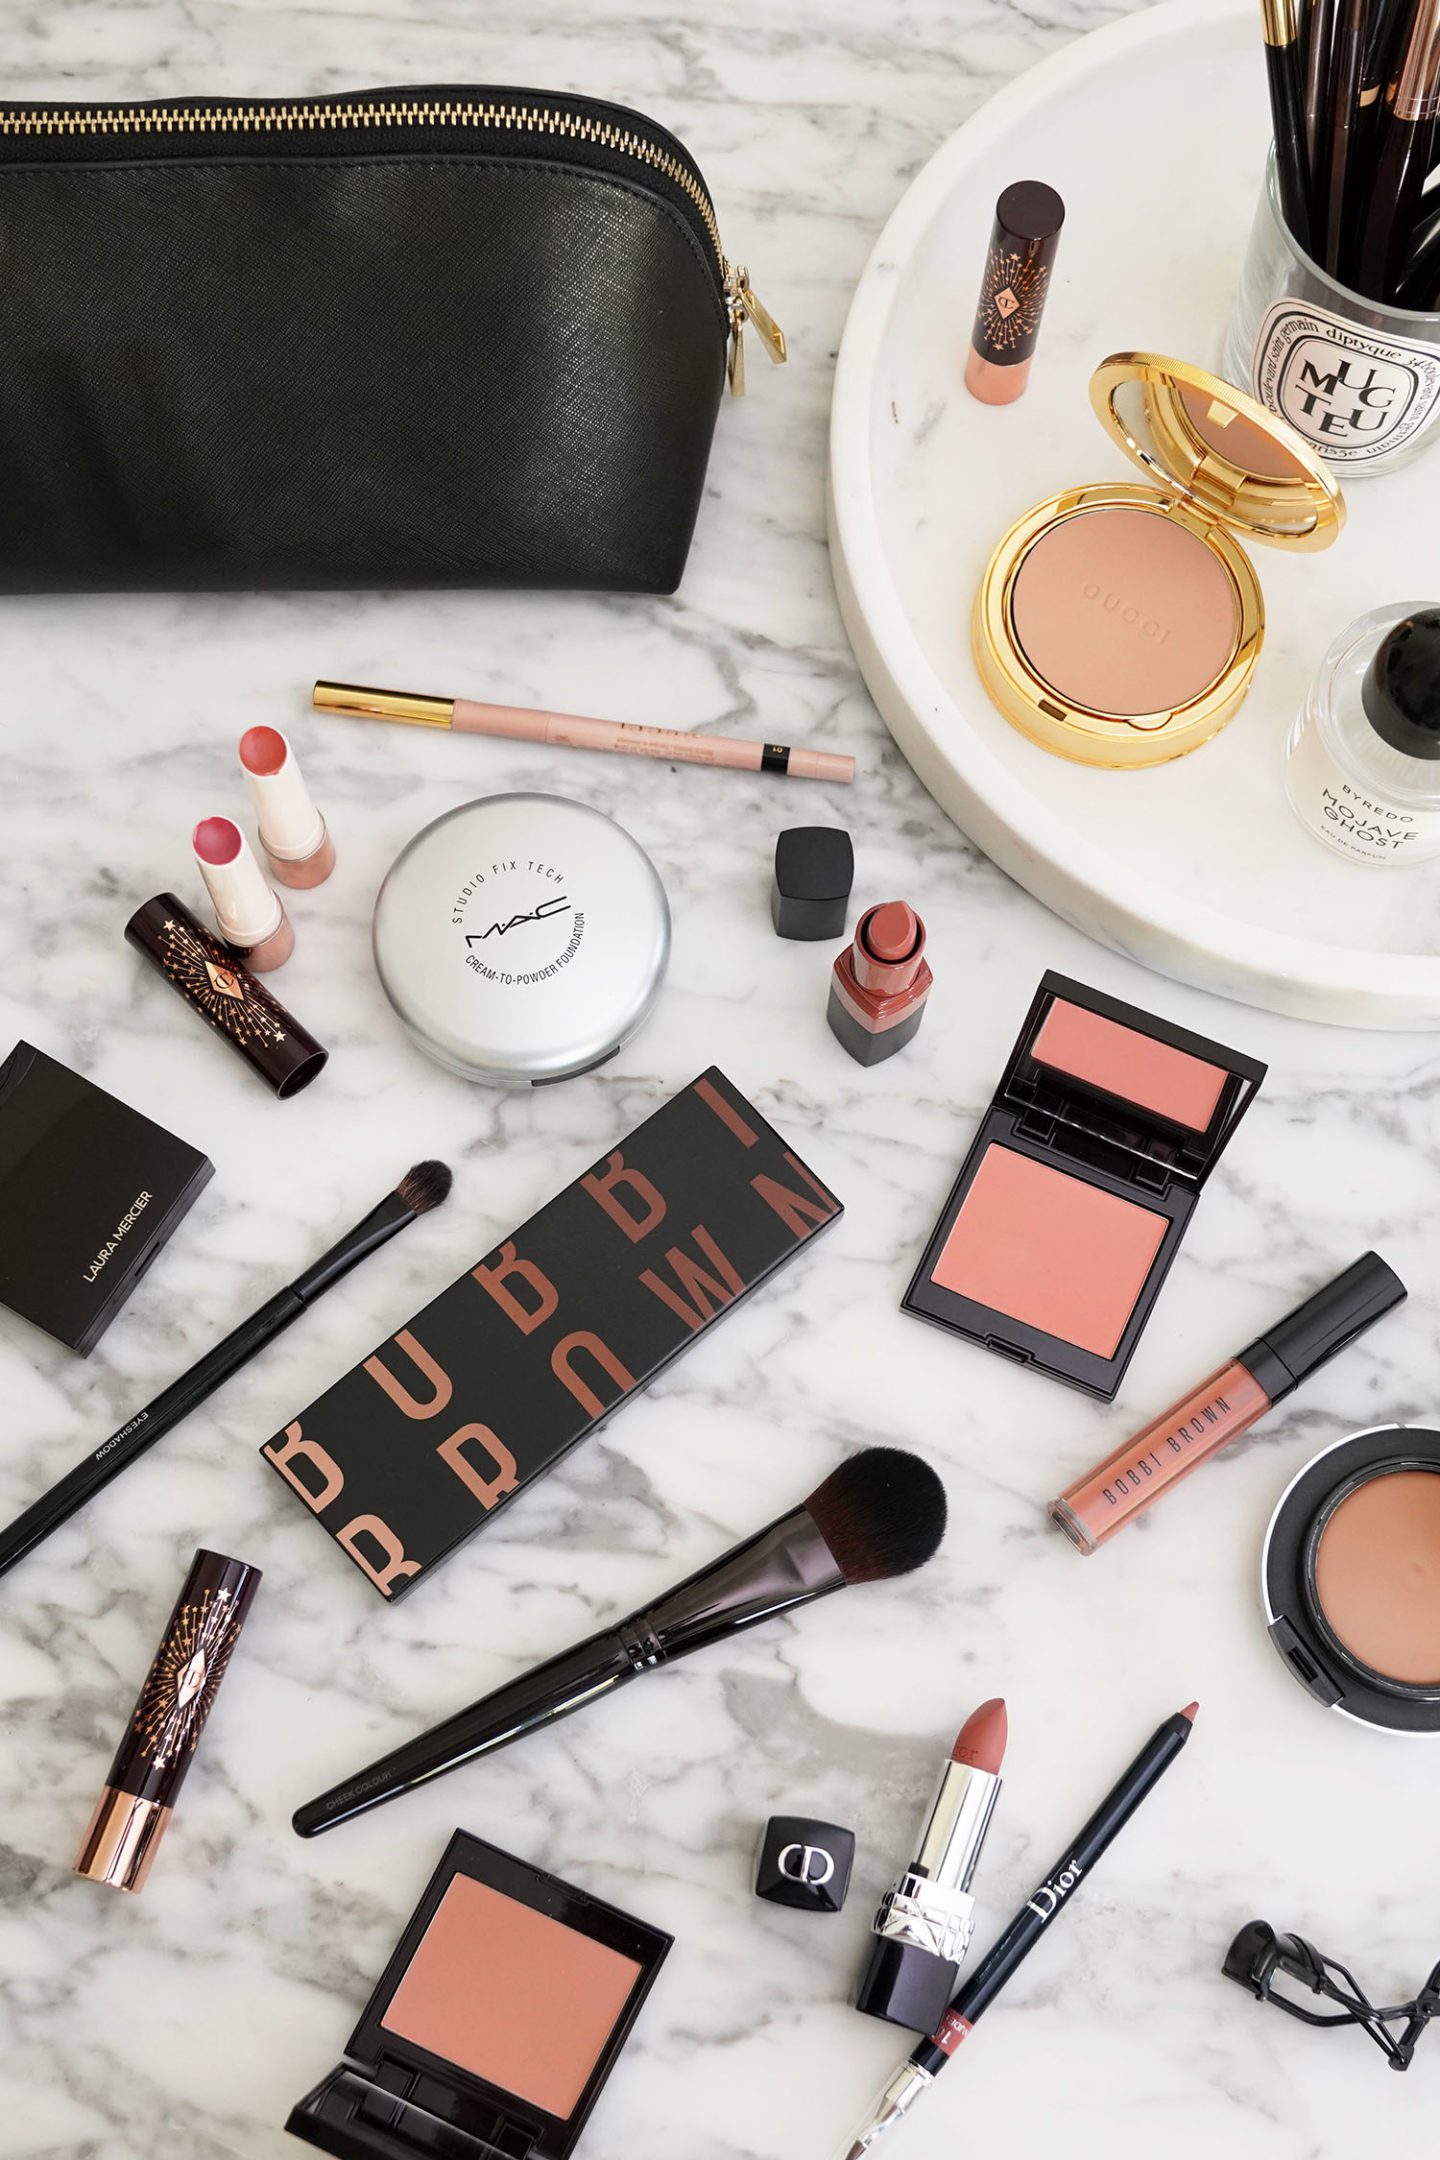 Nordstrom Spring Beauty Launches MAC, Charlotte Tilbury, Bobbi Brown | The Beauty Lookbook